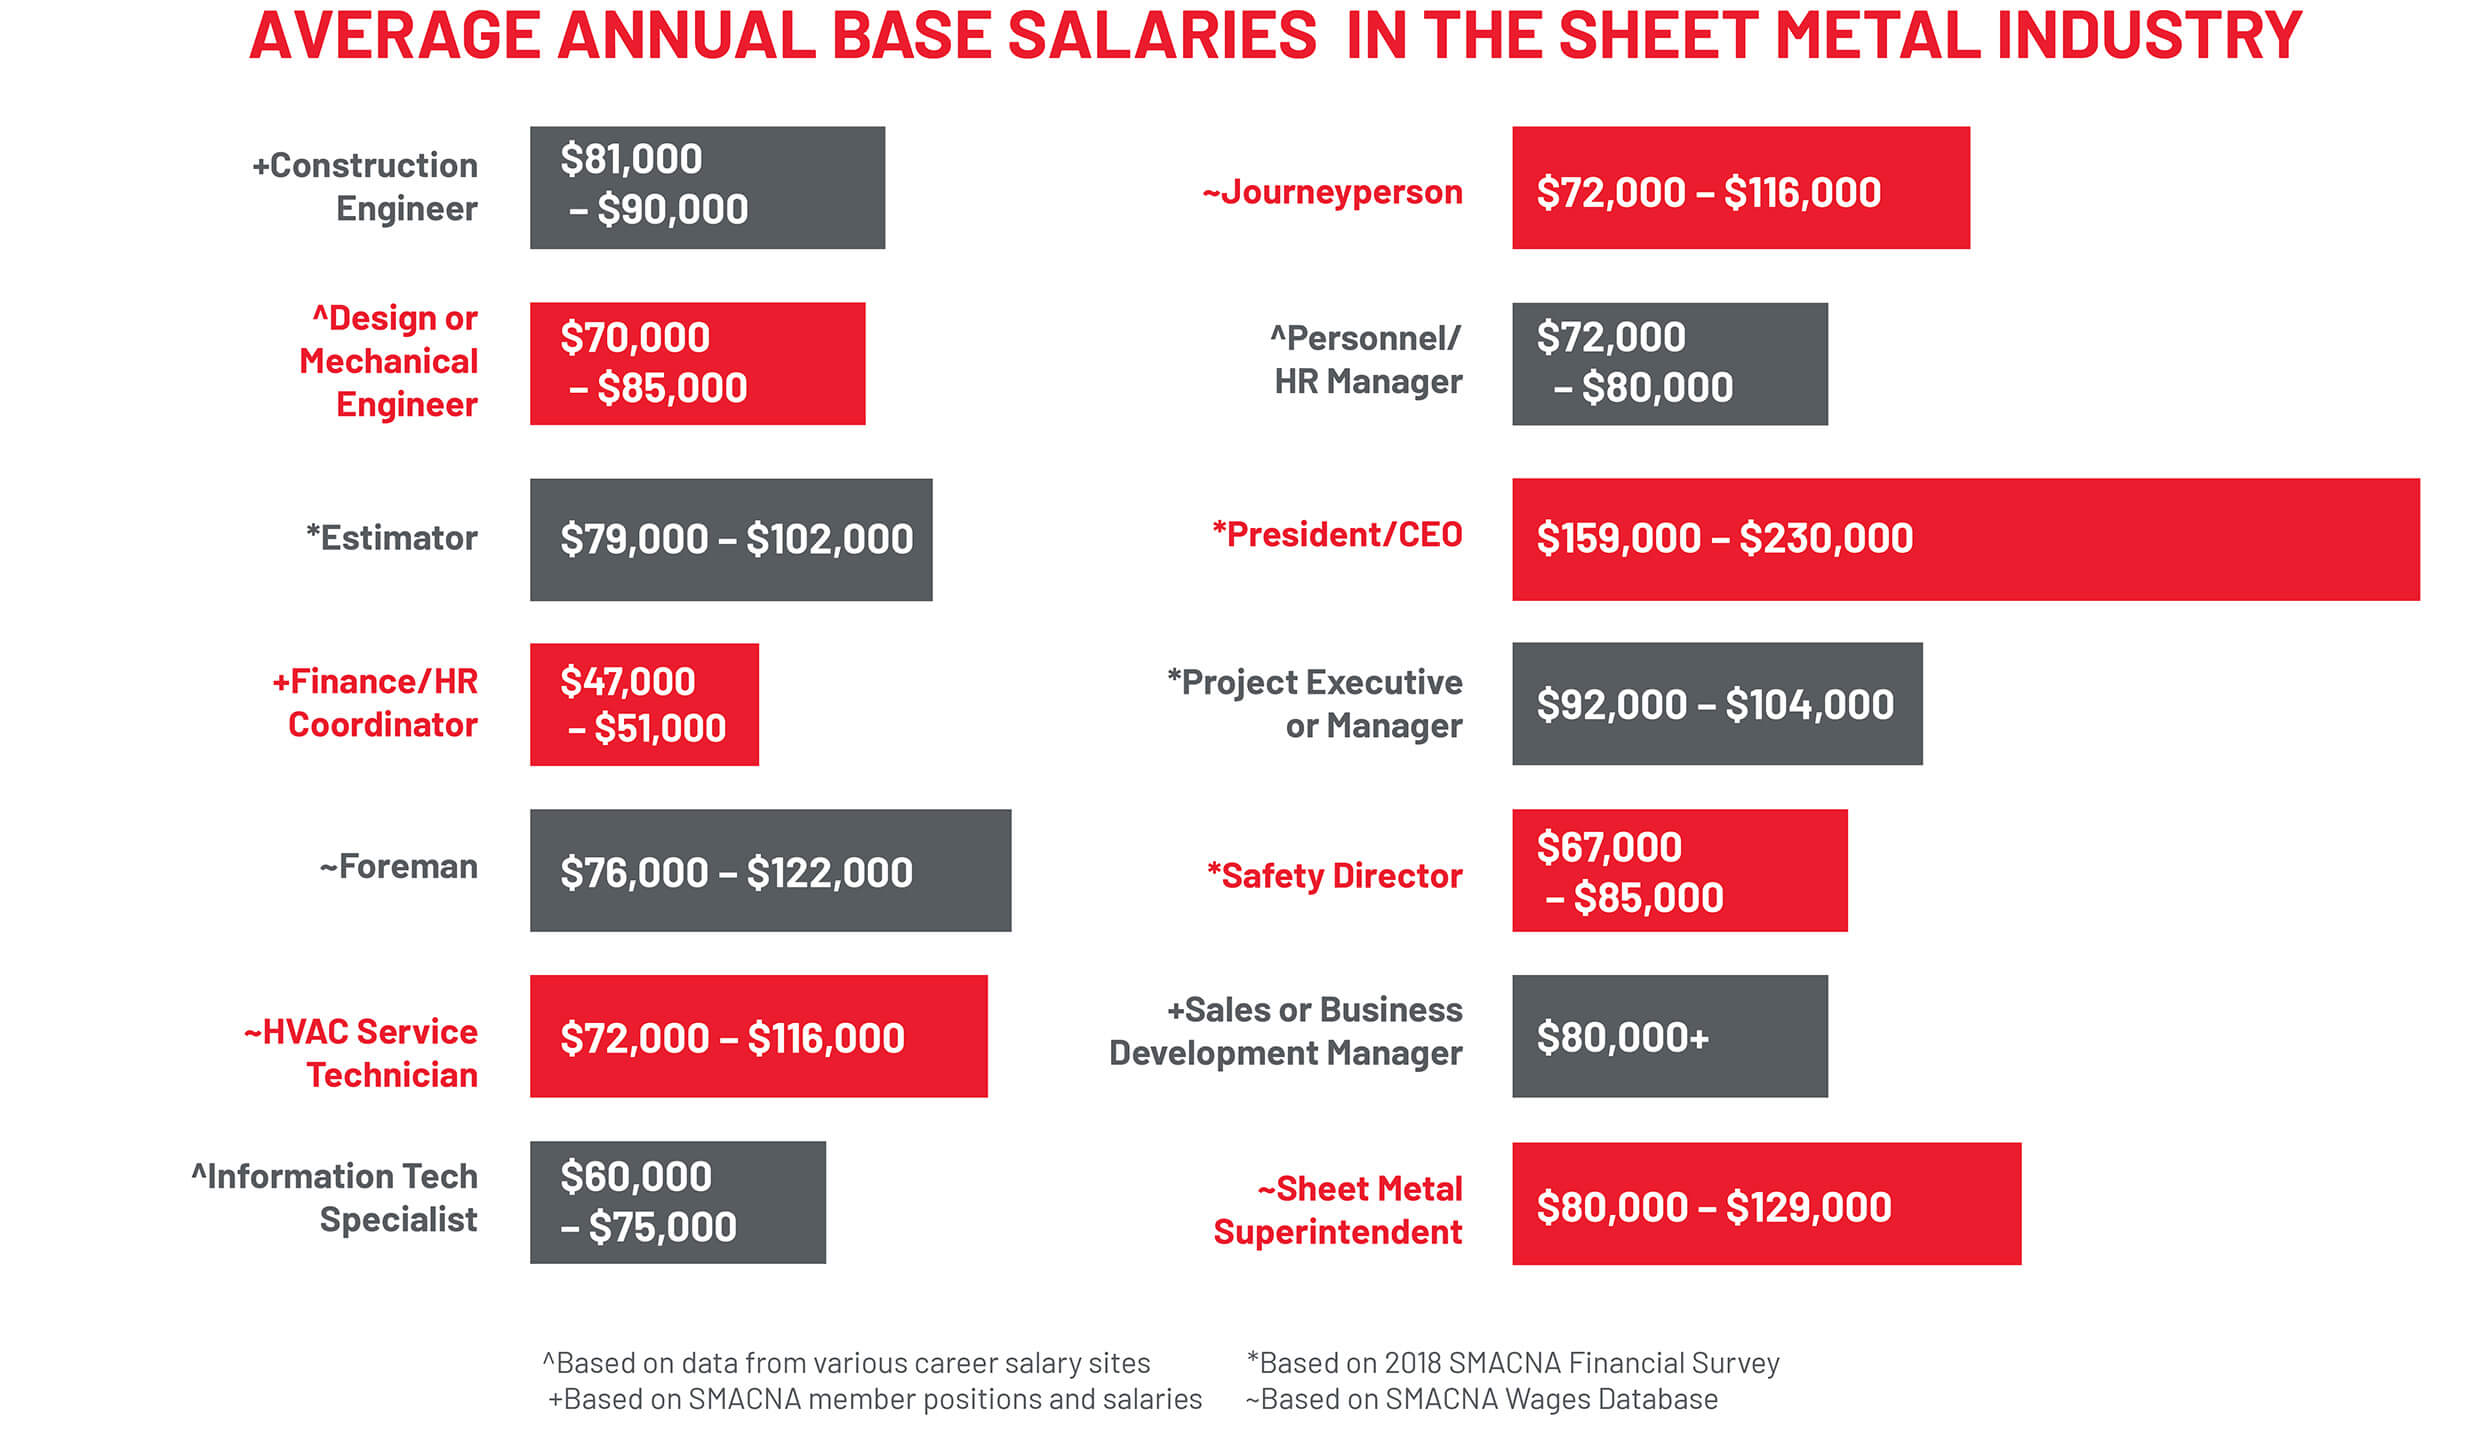 Average Annual Base Salaries of Workers in the Sheet Metal Industry